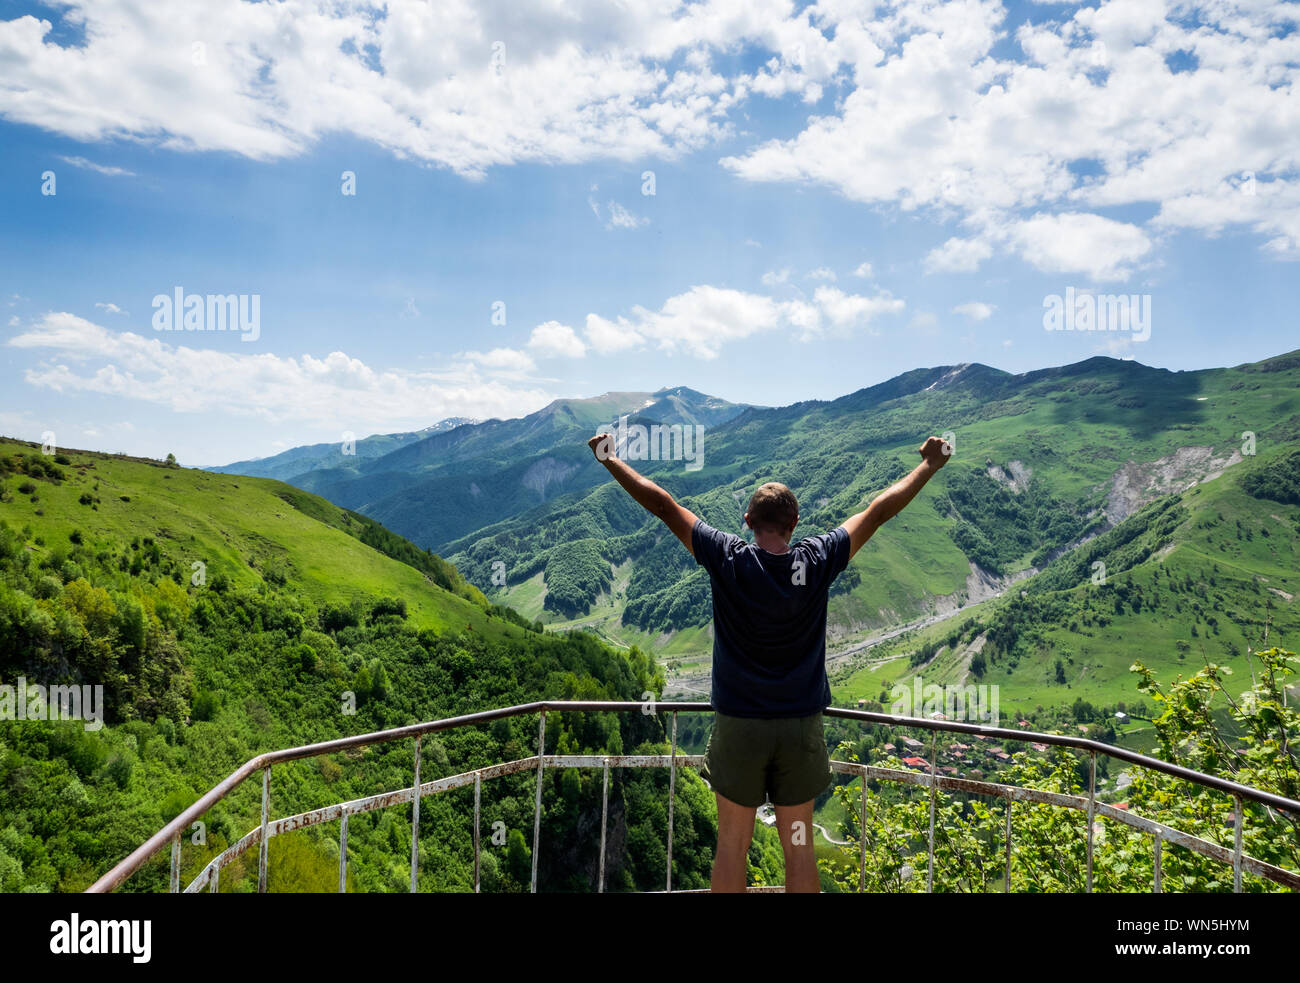 Man With Arms Raised Standing At Observation Point Against Mountain And Cloudy Sky Stock Photo